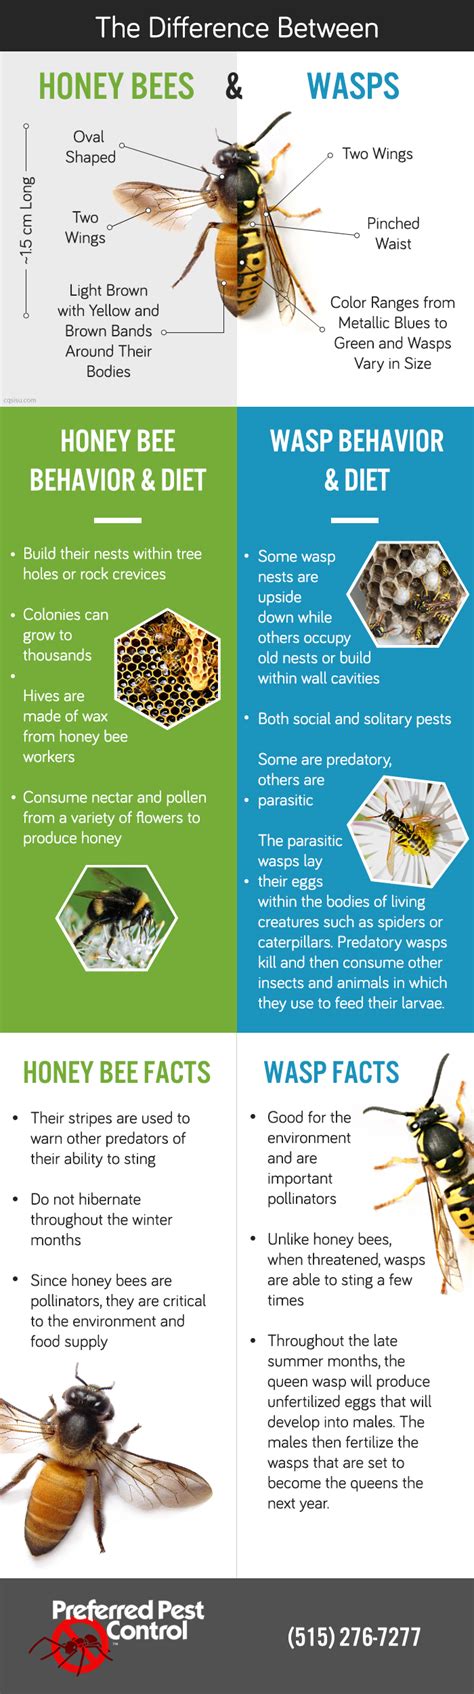 The Difference Between Honey Bees And Wasps